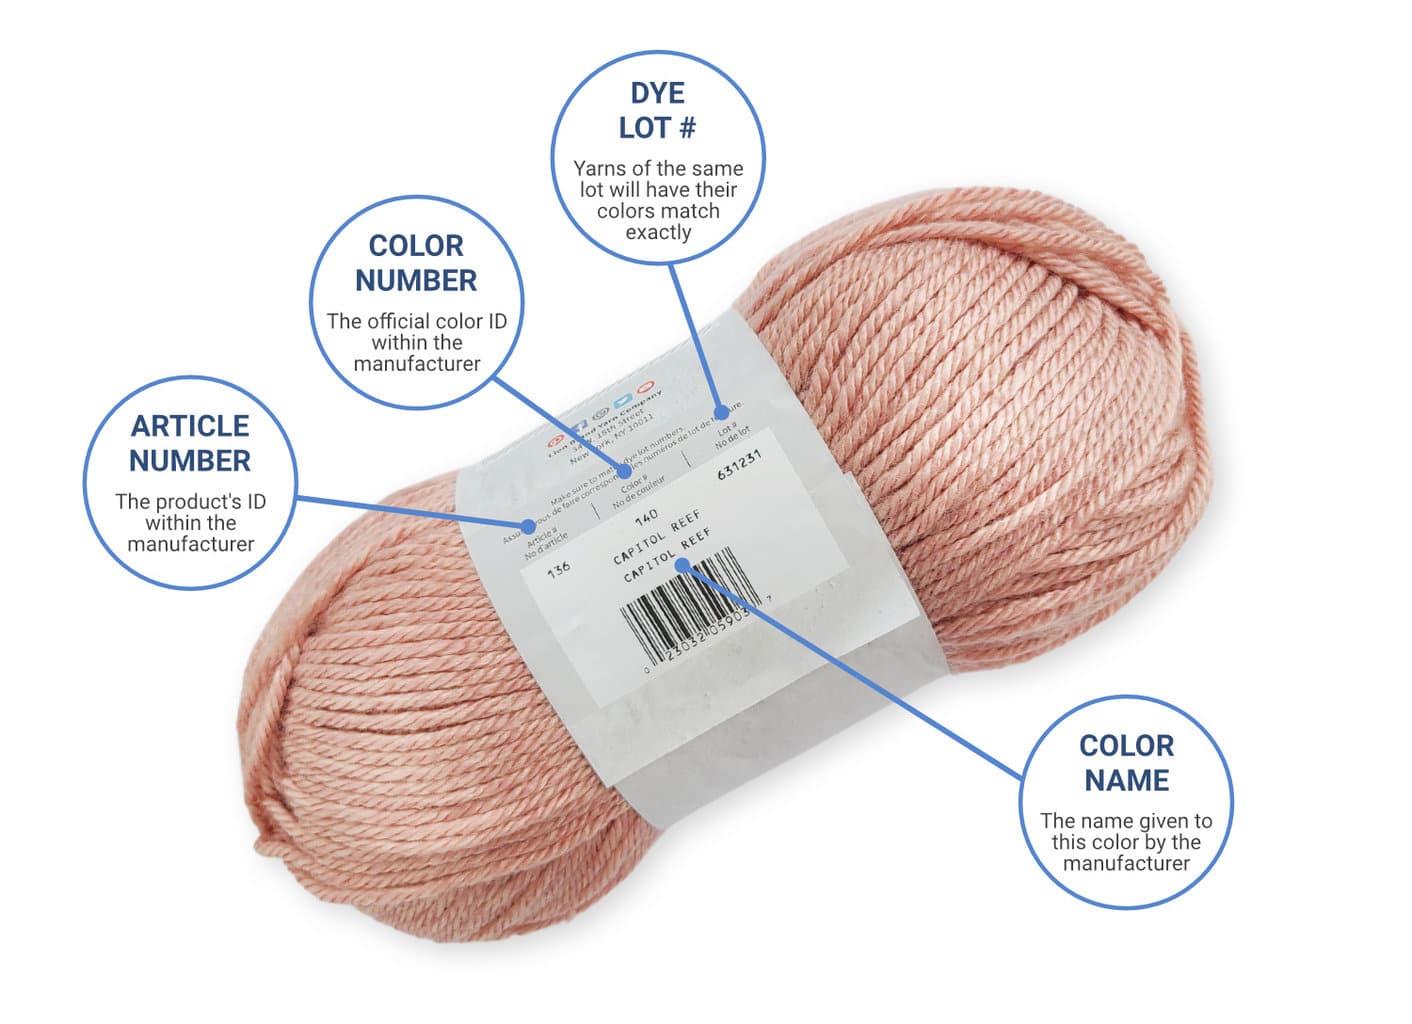 Essential Free Guide on How to Make Yarn